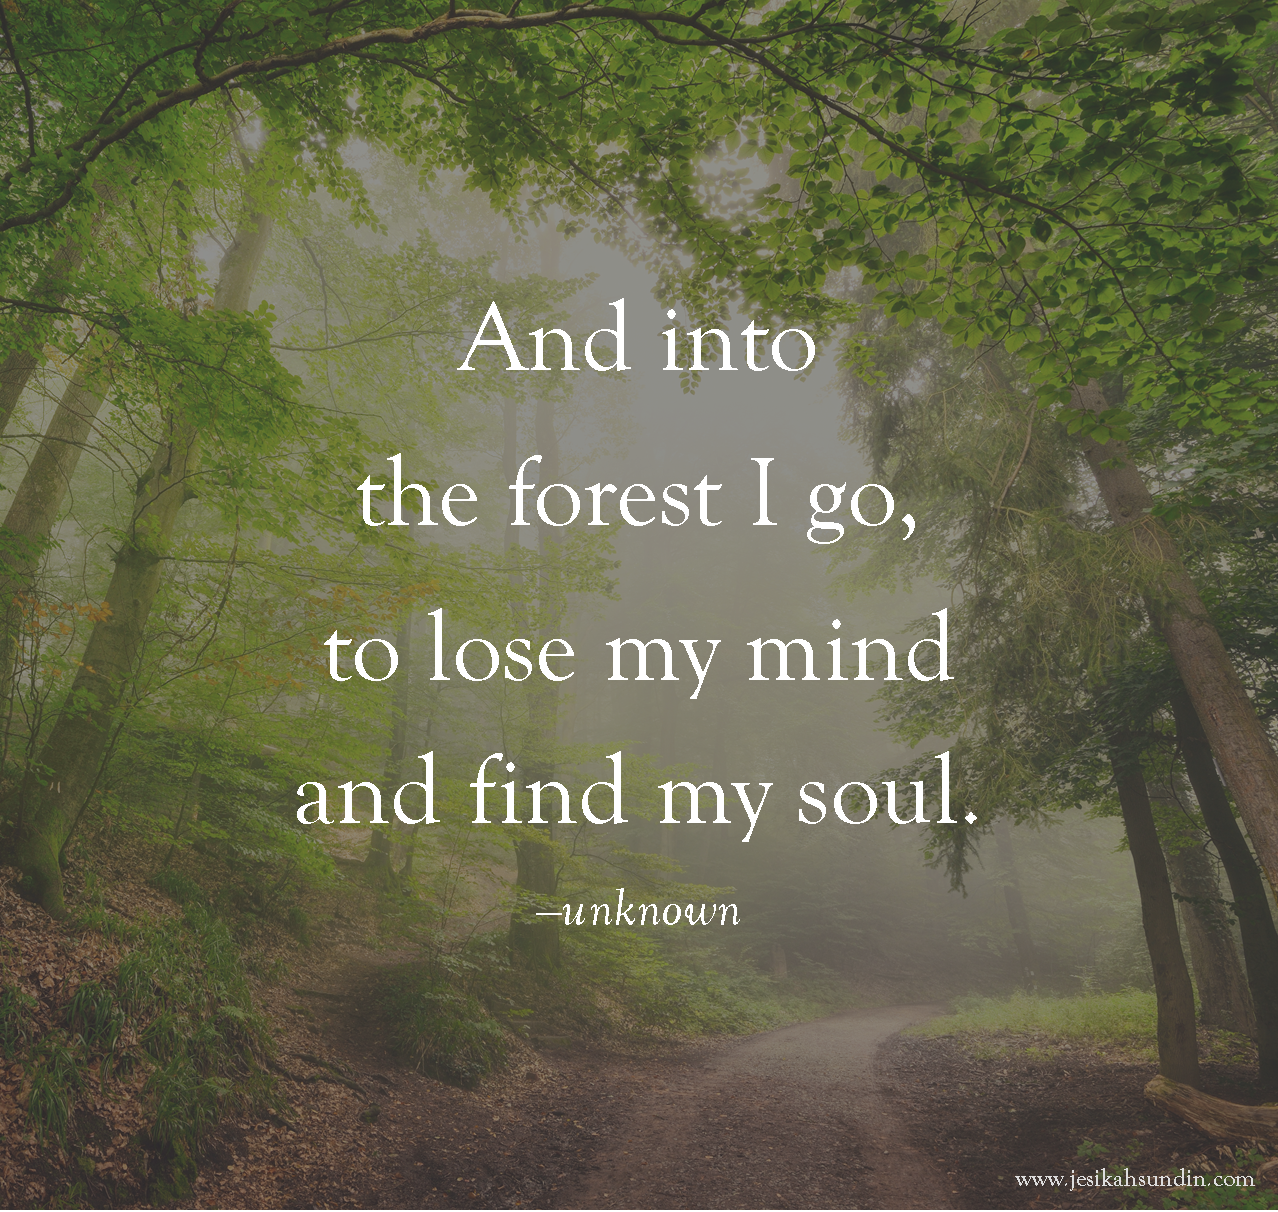 The Biodome Chronicles, “And into the forest I go, to lose my mind and...